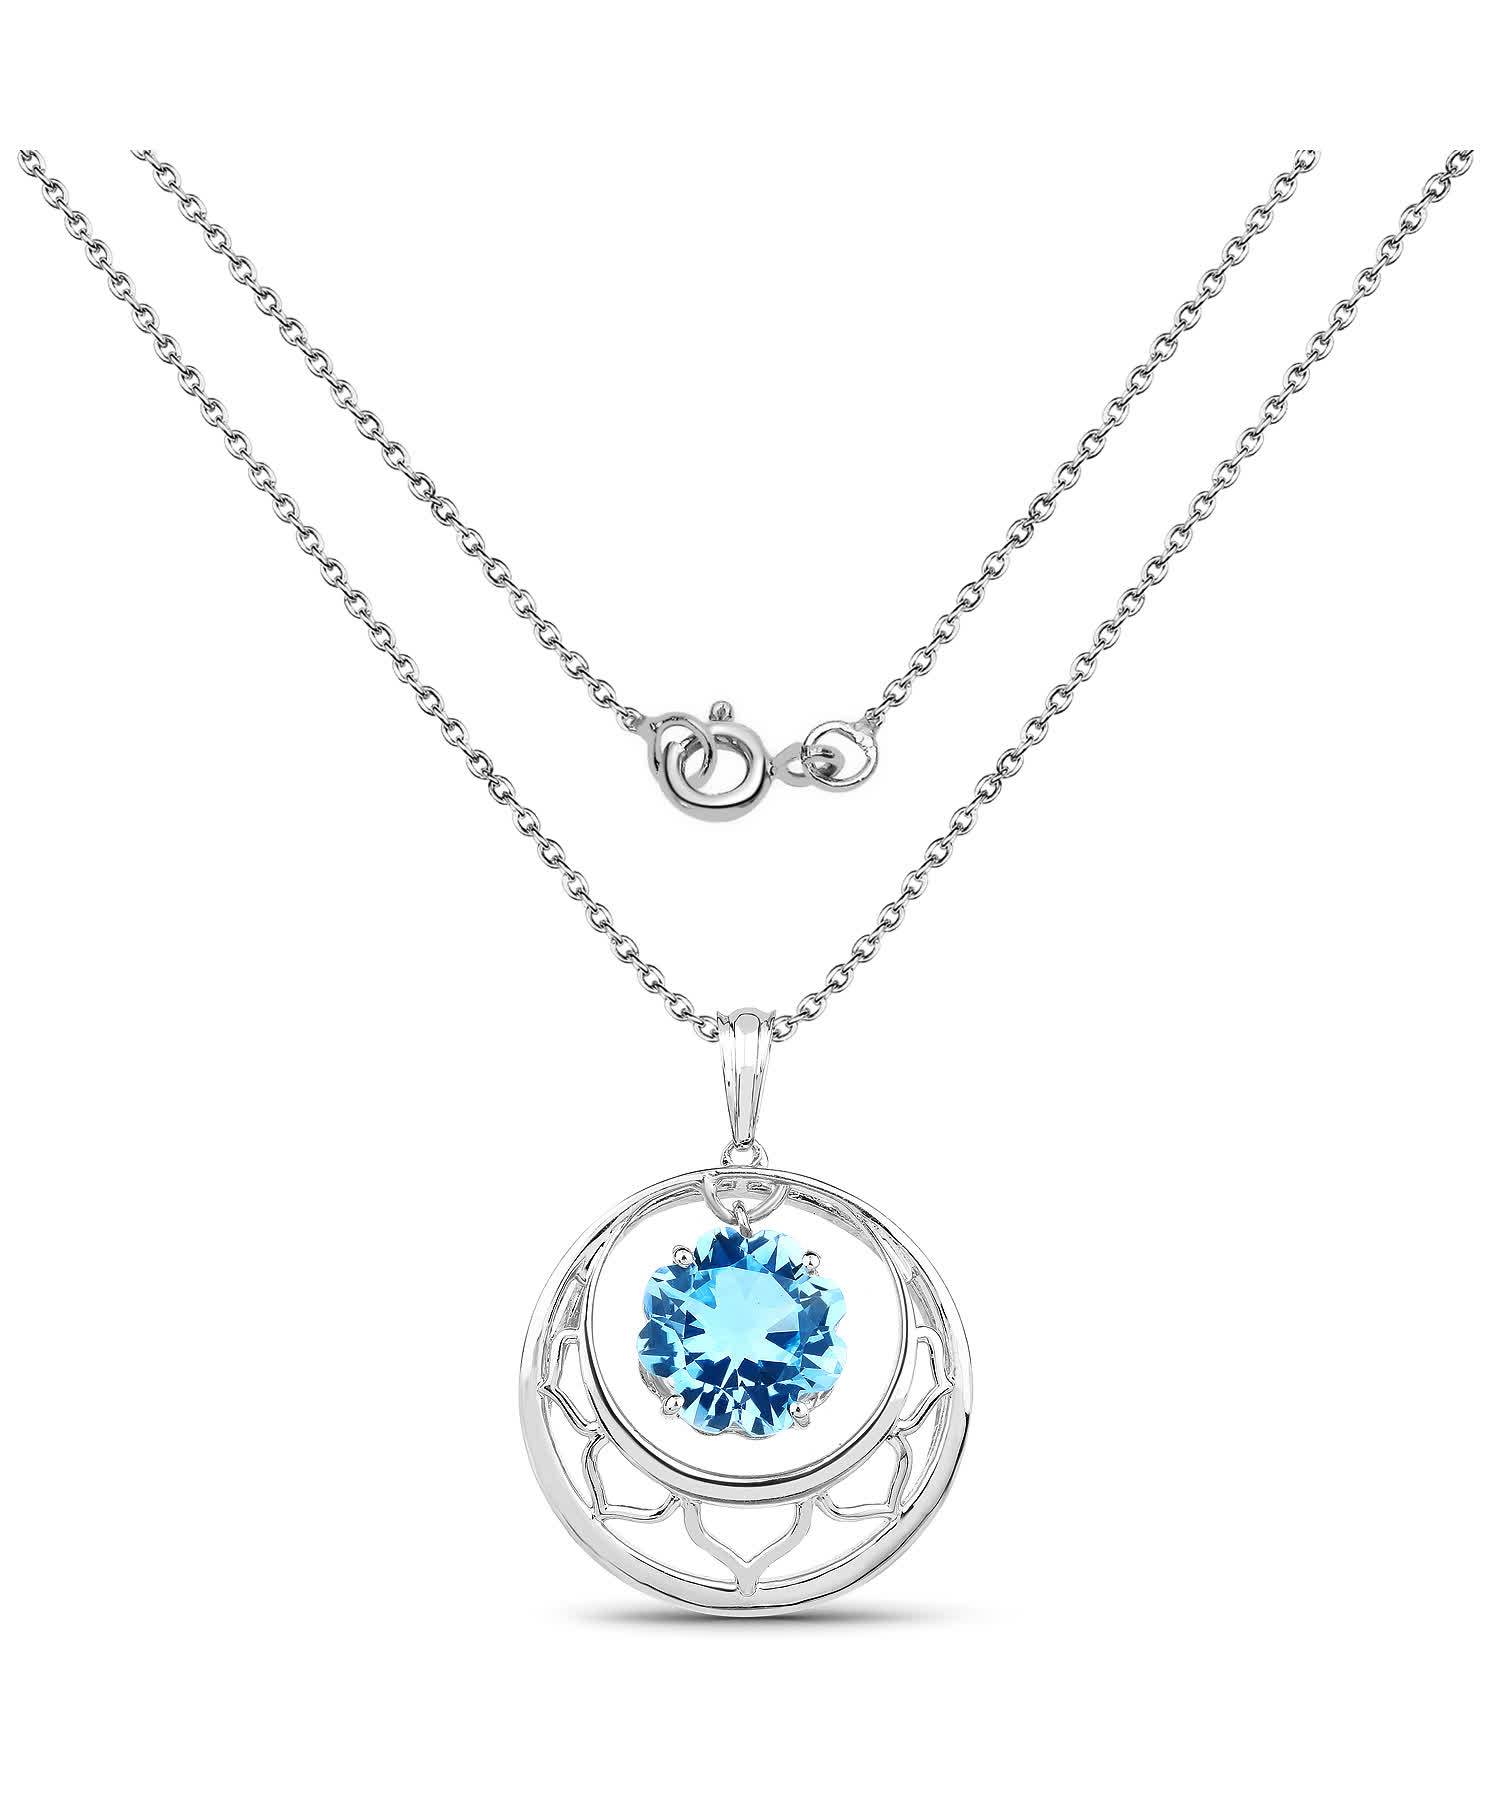 8.75ctw Natural Swiss Blue Topaz Rhodium Plated 925 Sterling Silver Circle Pendant With Chain View 2